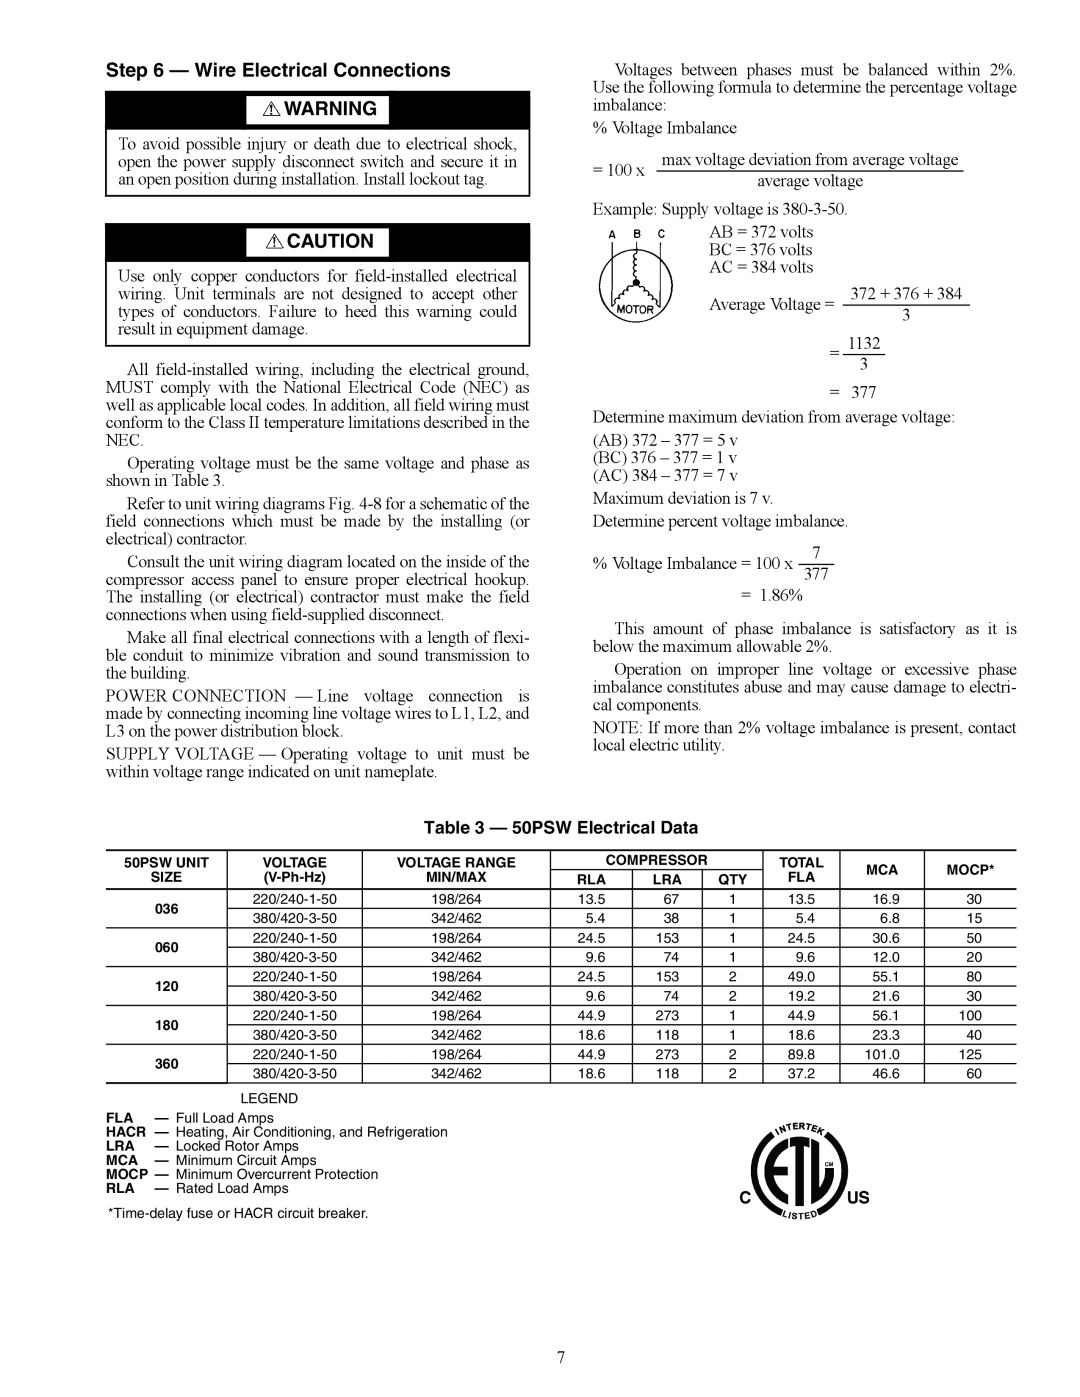 Carrier 50PSW036-360 specifications Wire Electrical Connections, 50PSW Electrical Data 